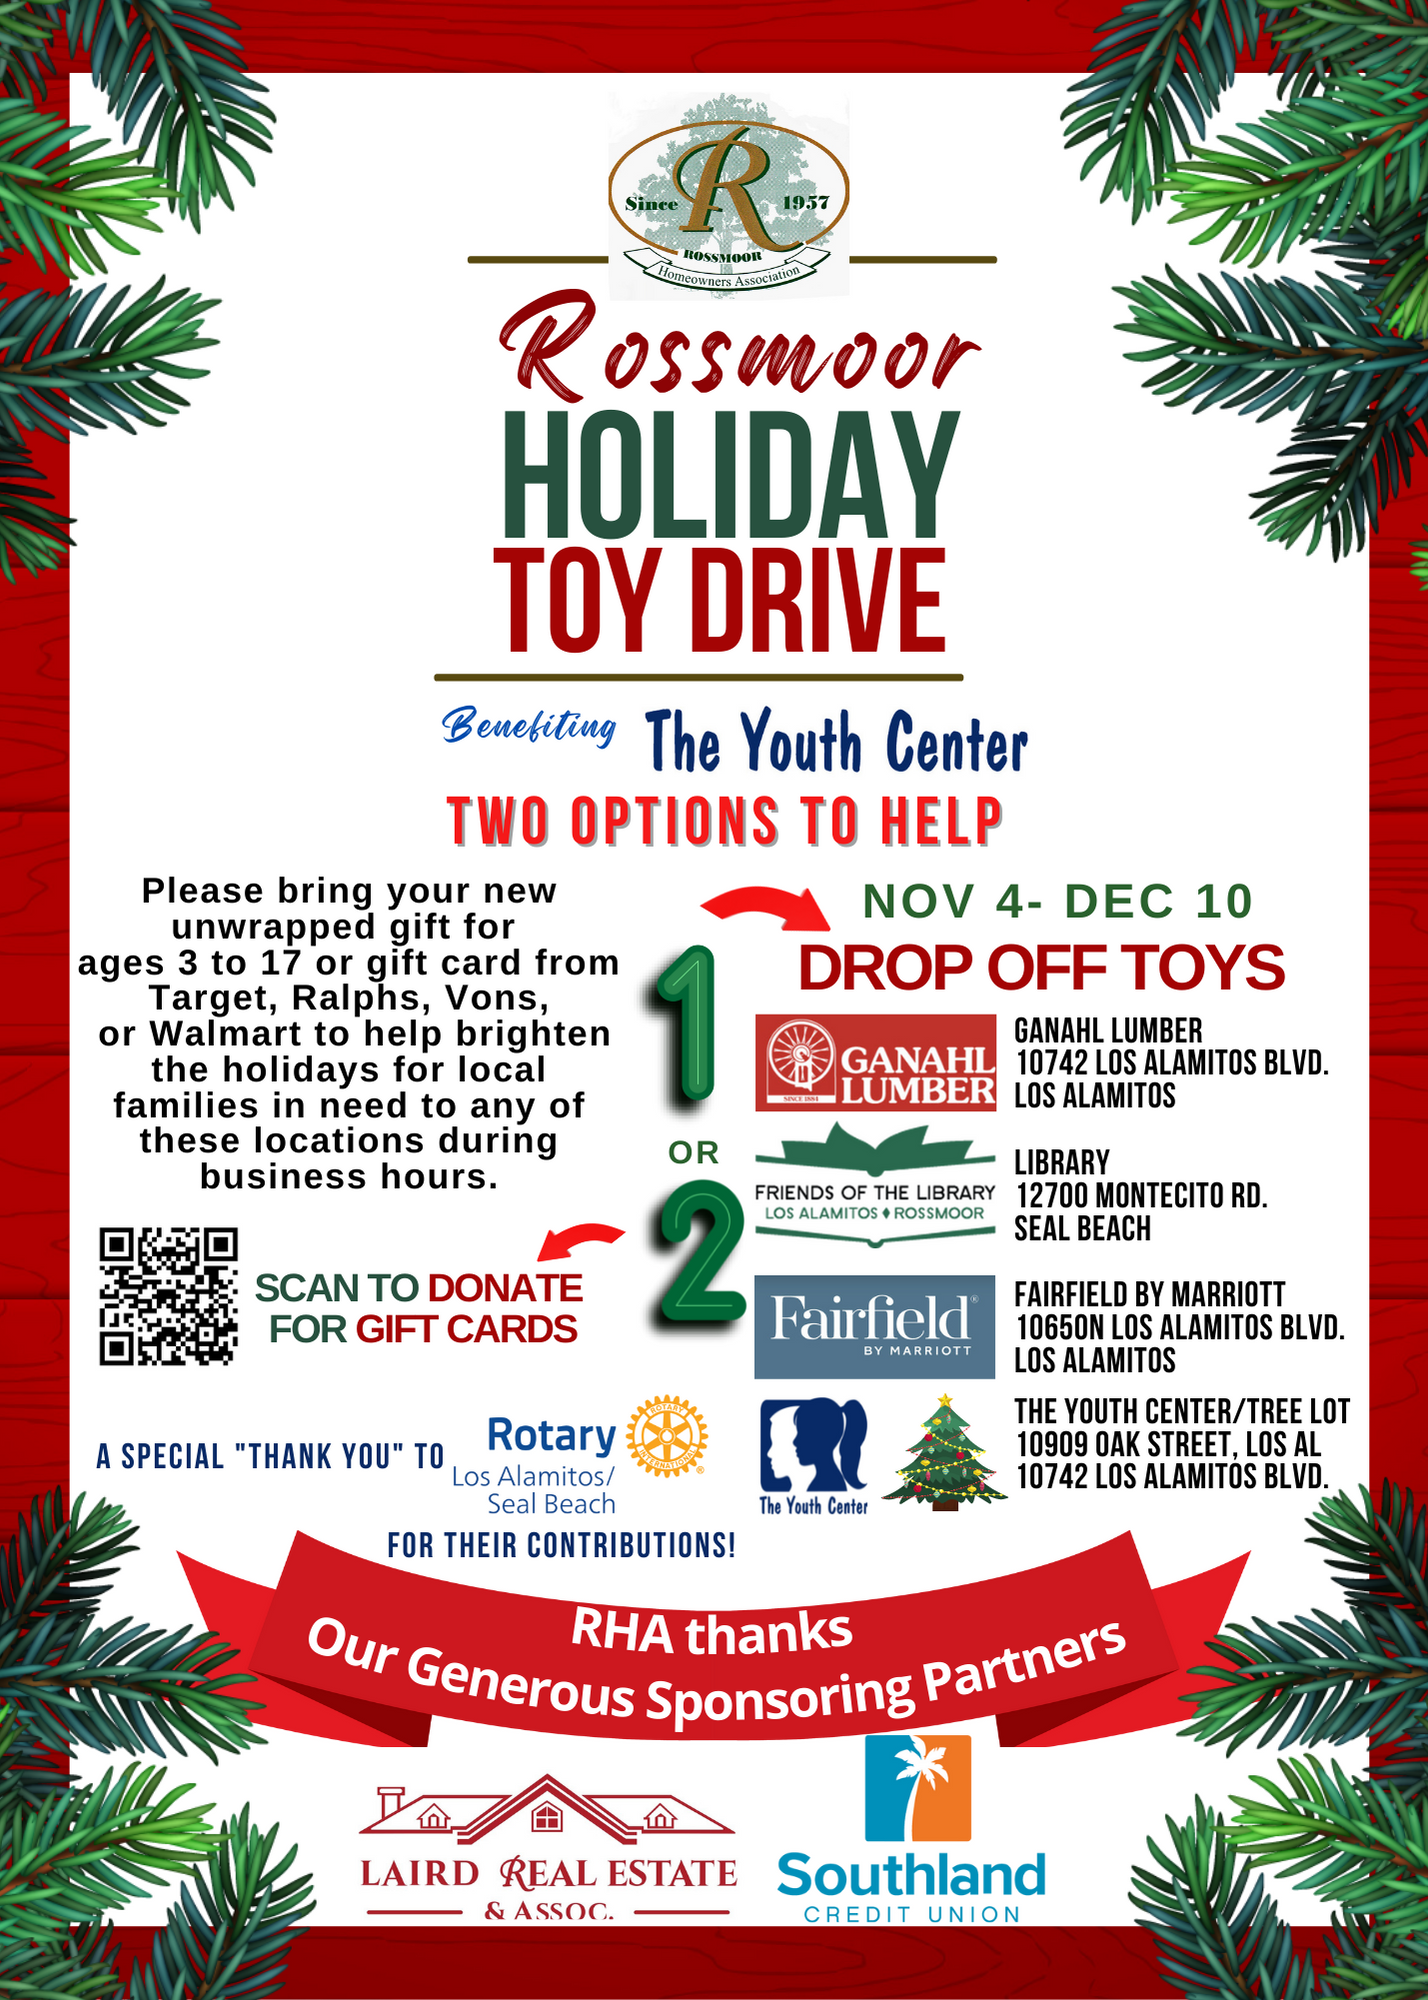 Rossmoor Annual Toy Drive for The Youth Center